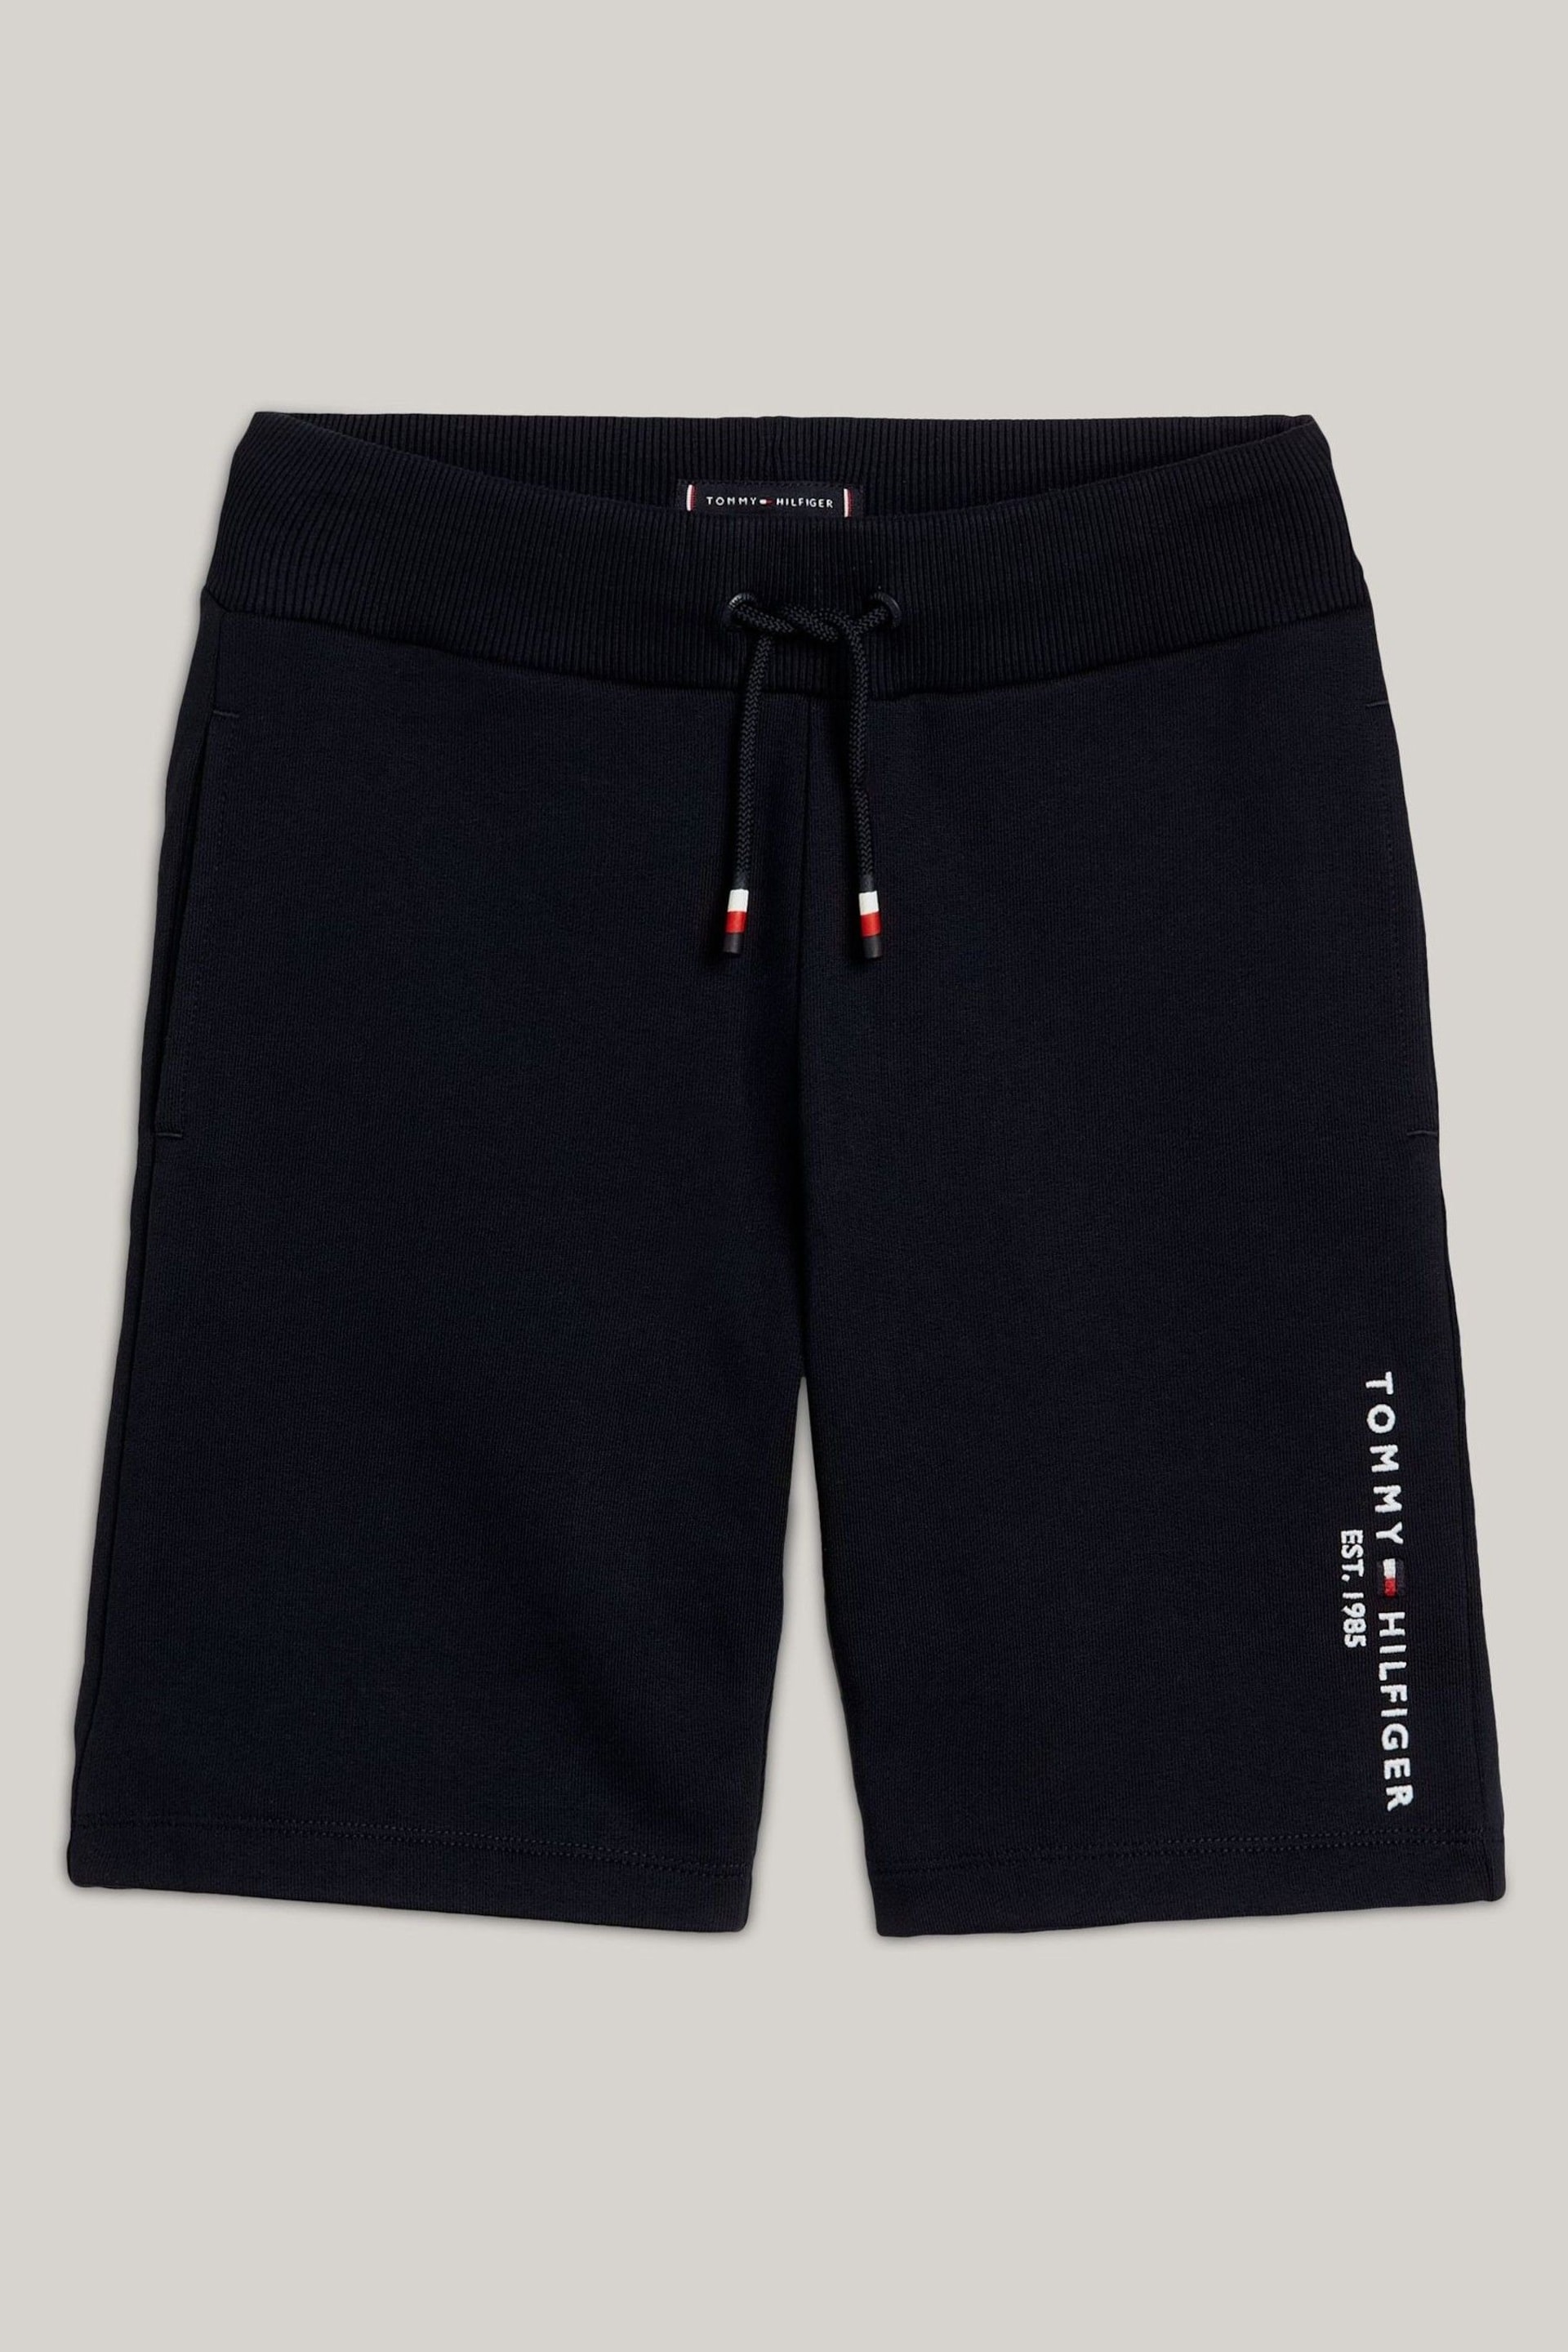 Tommy Hilfiger Blue Essential Sweat Shorts - Image 5 of 5